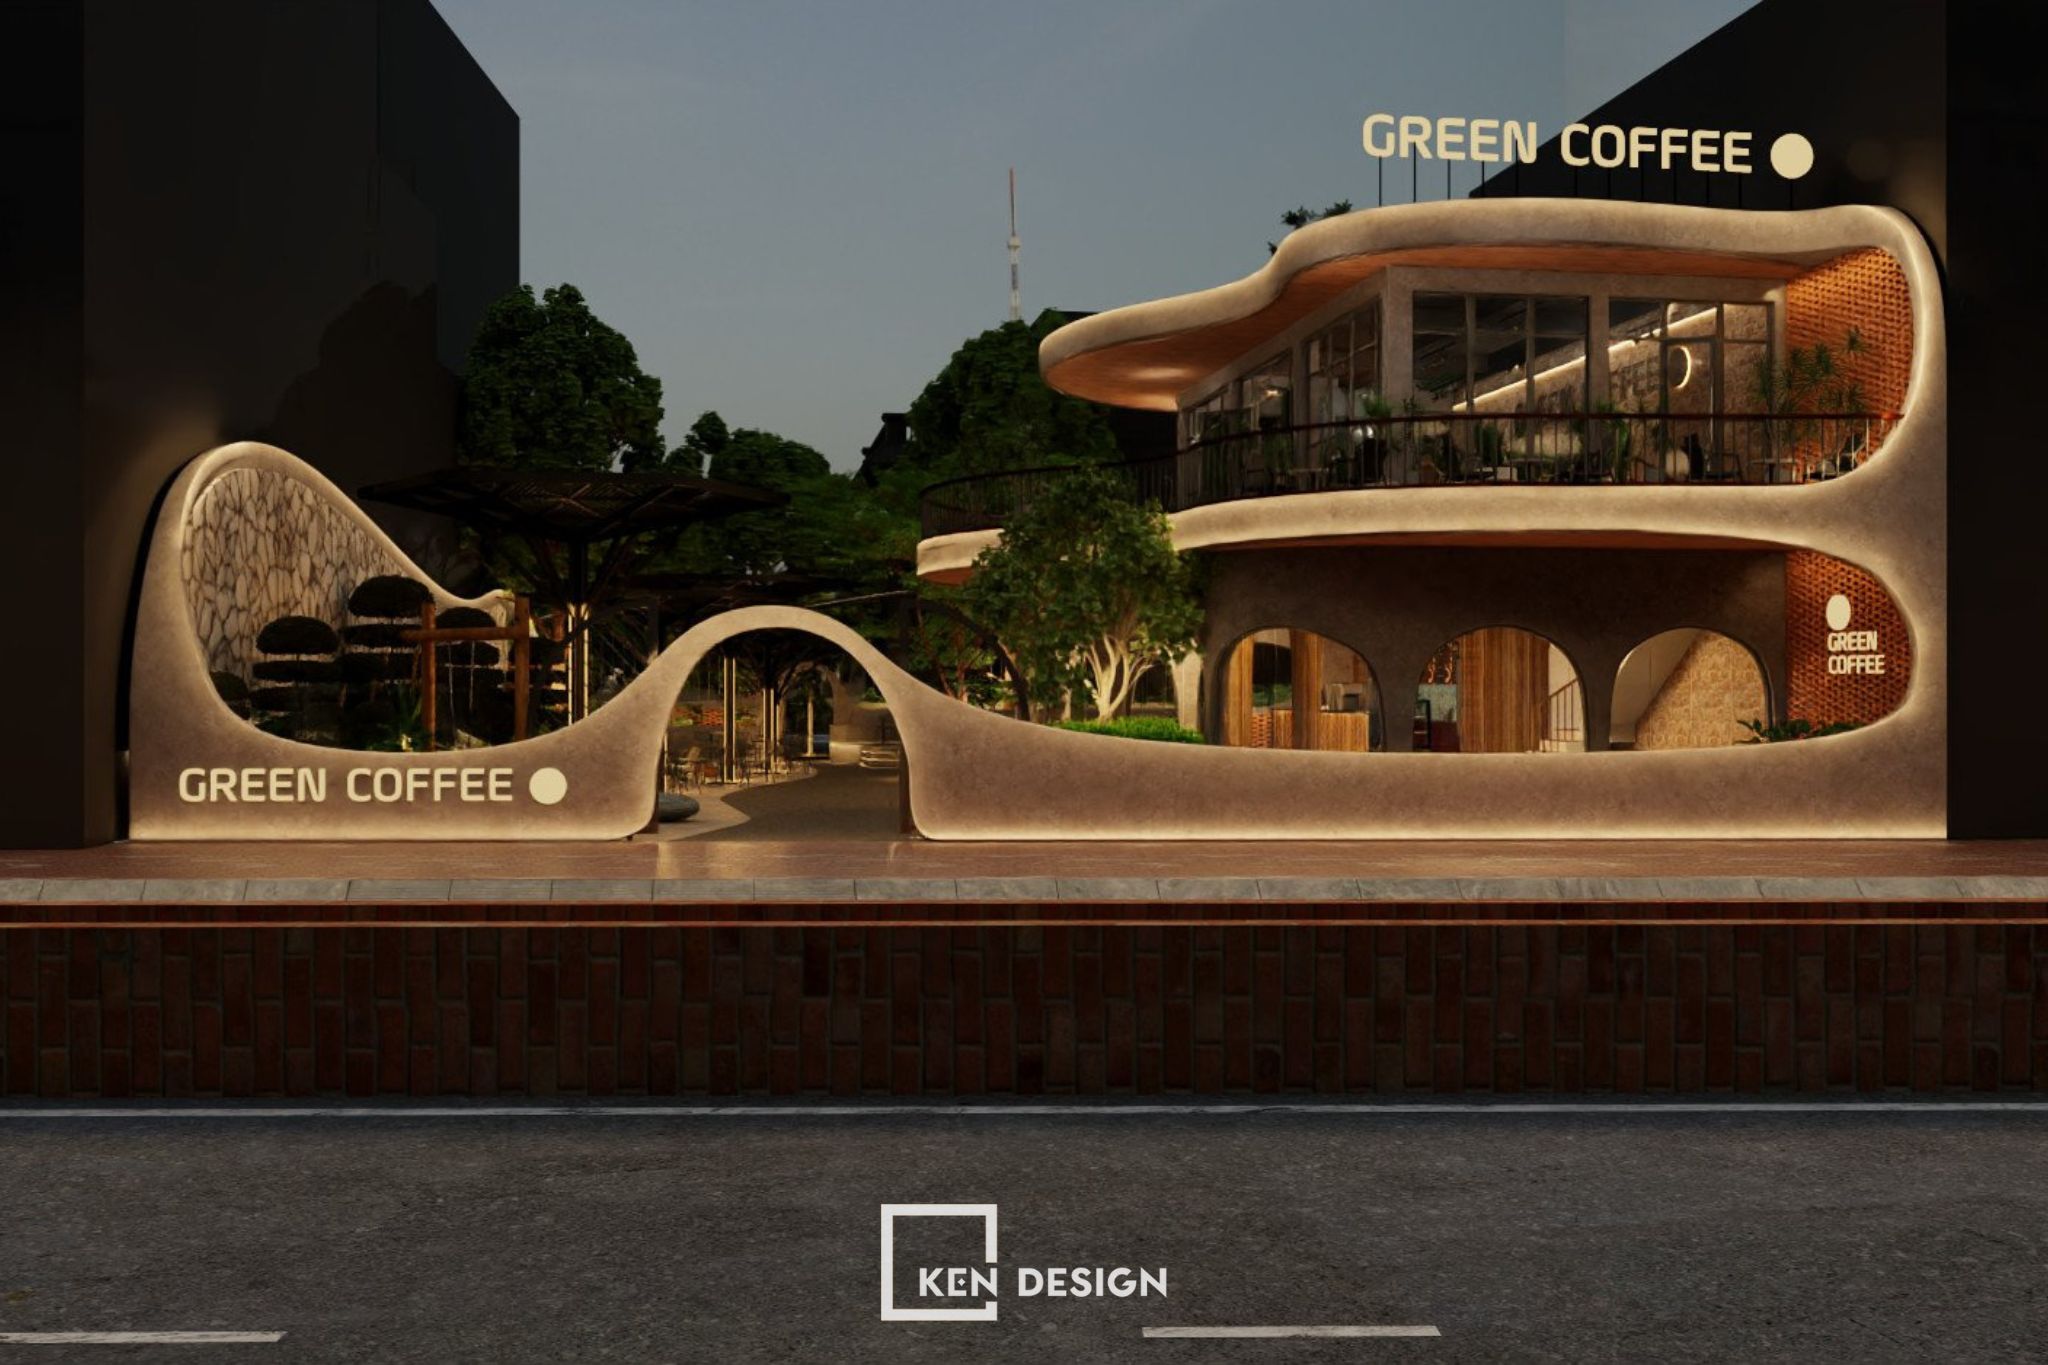 The design of Green Coffee Cafe